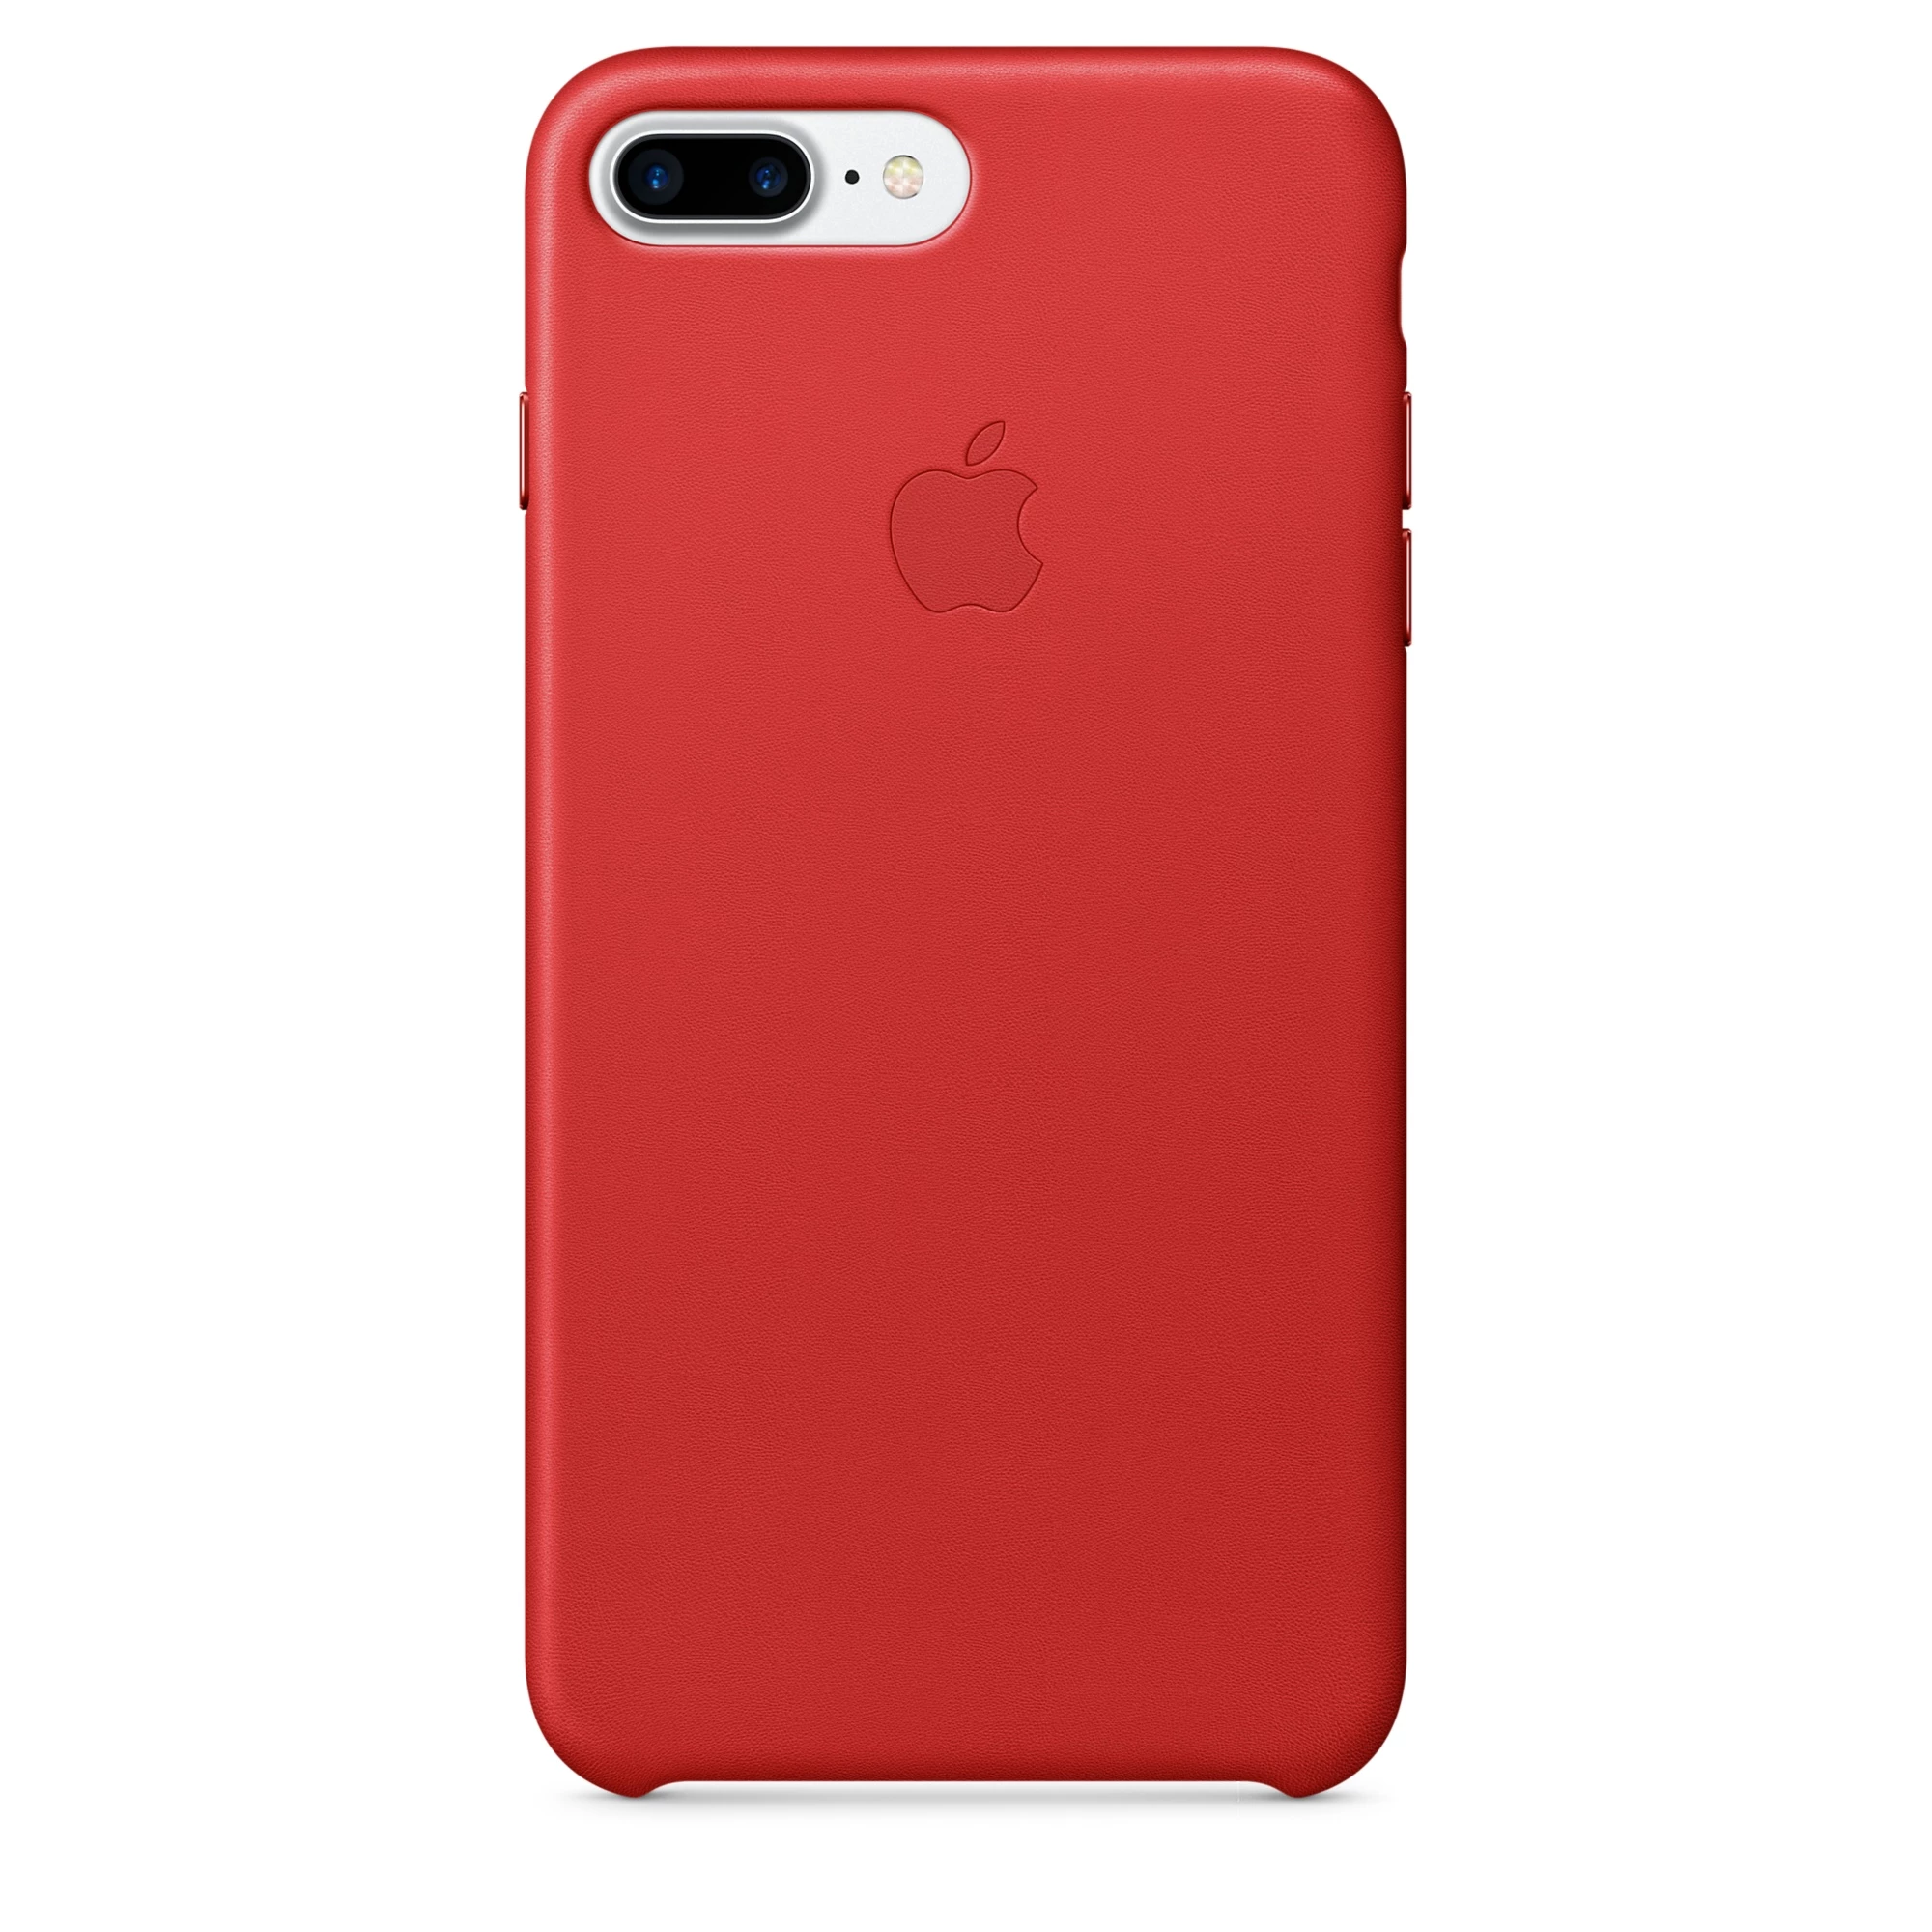 Apple iPhone 7/8 Plus Leather Case - (PRODUCT) RED (MMYK2, MQHN2)